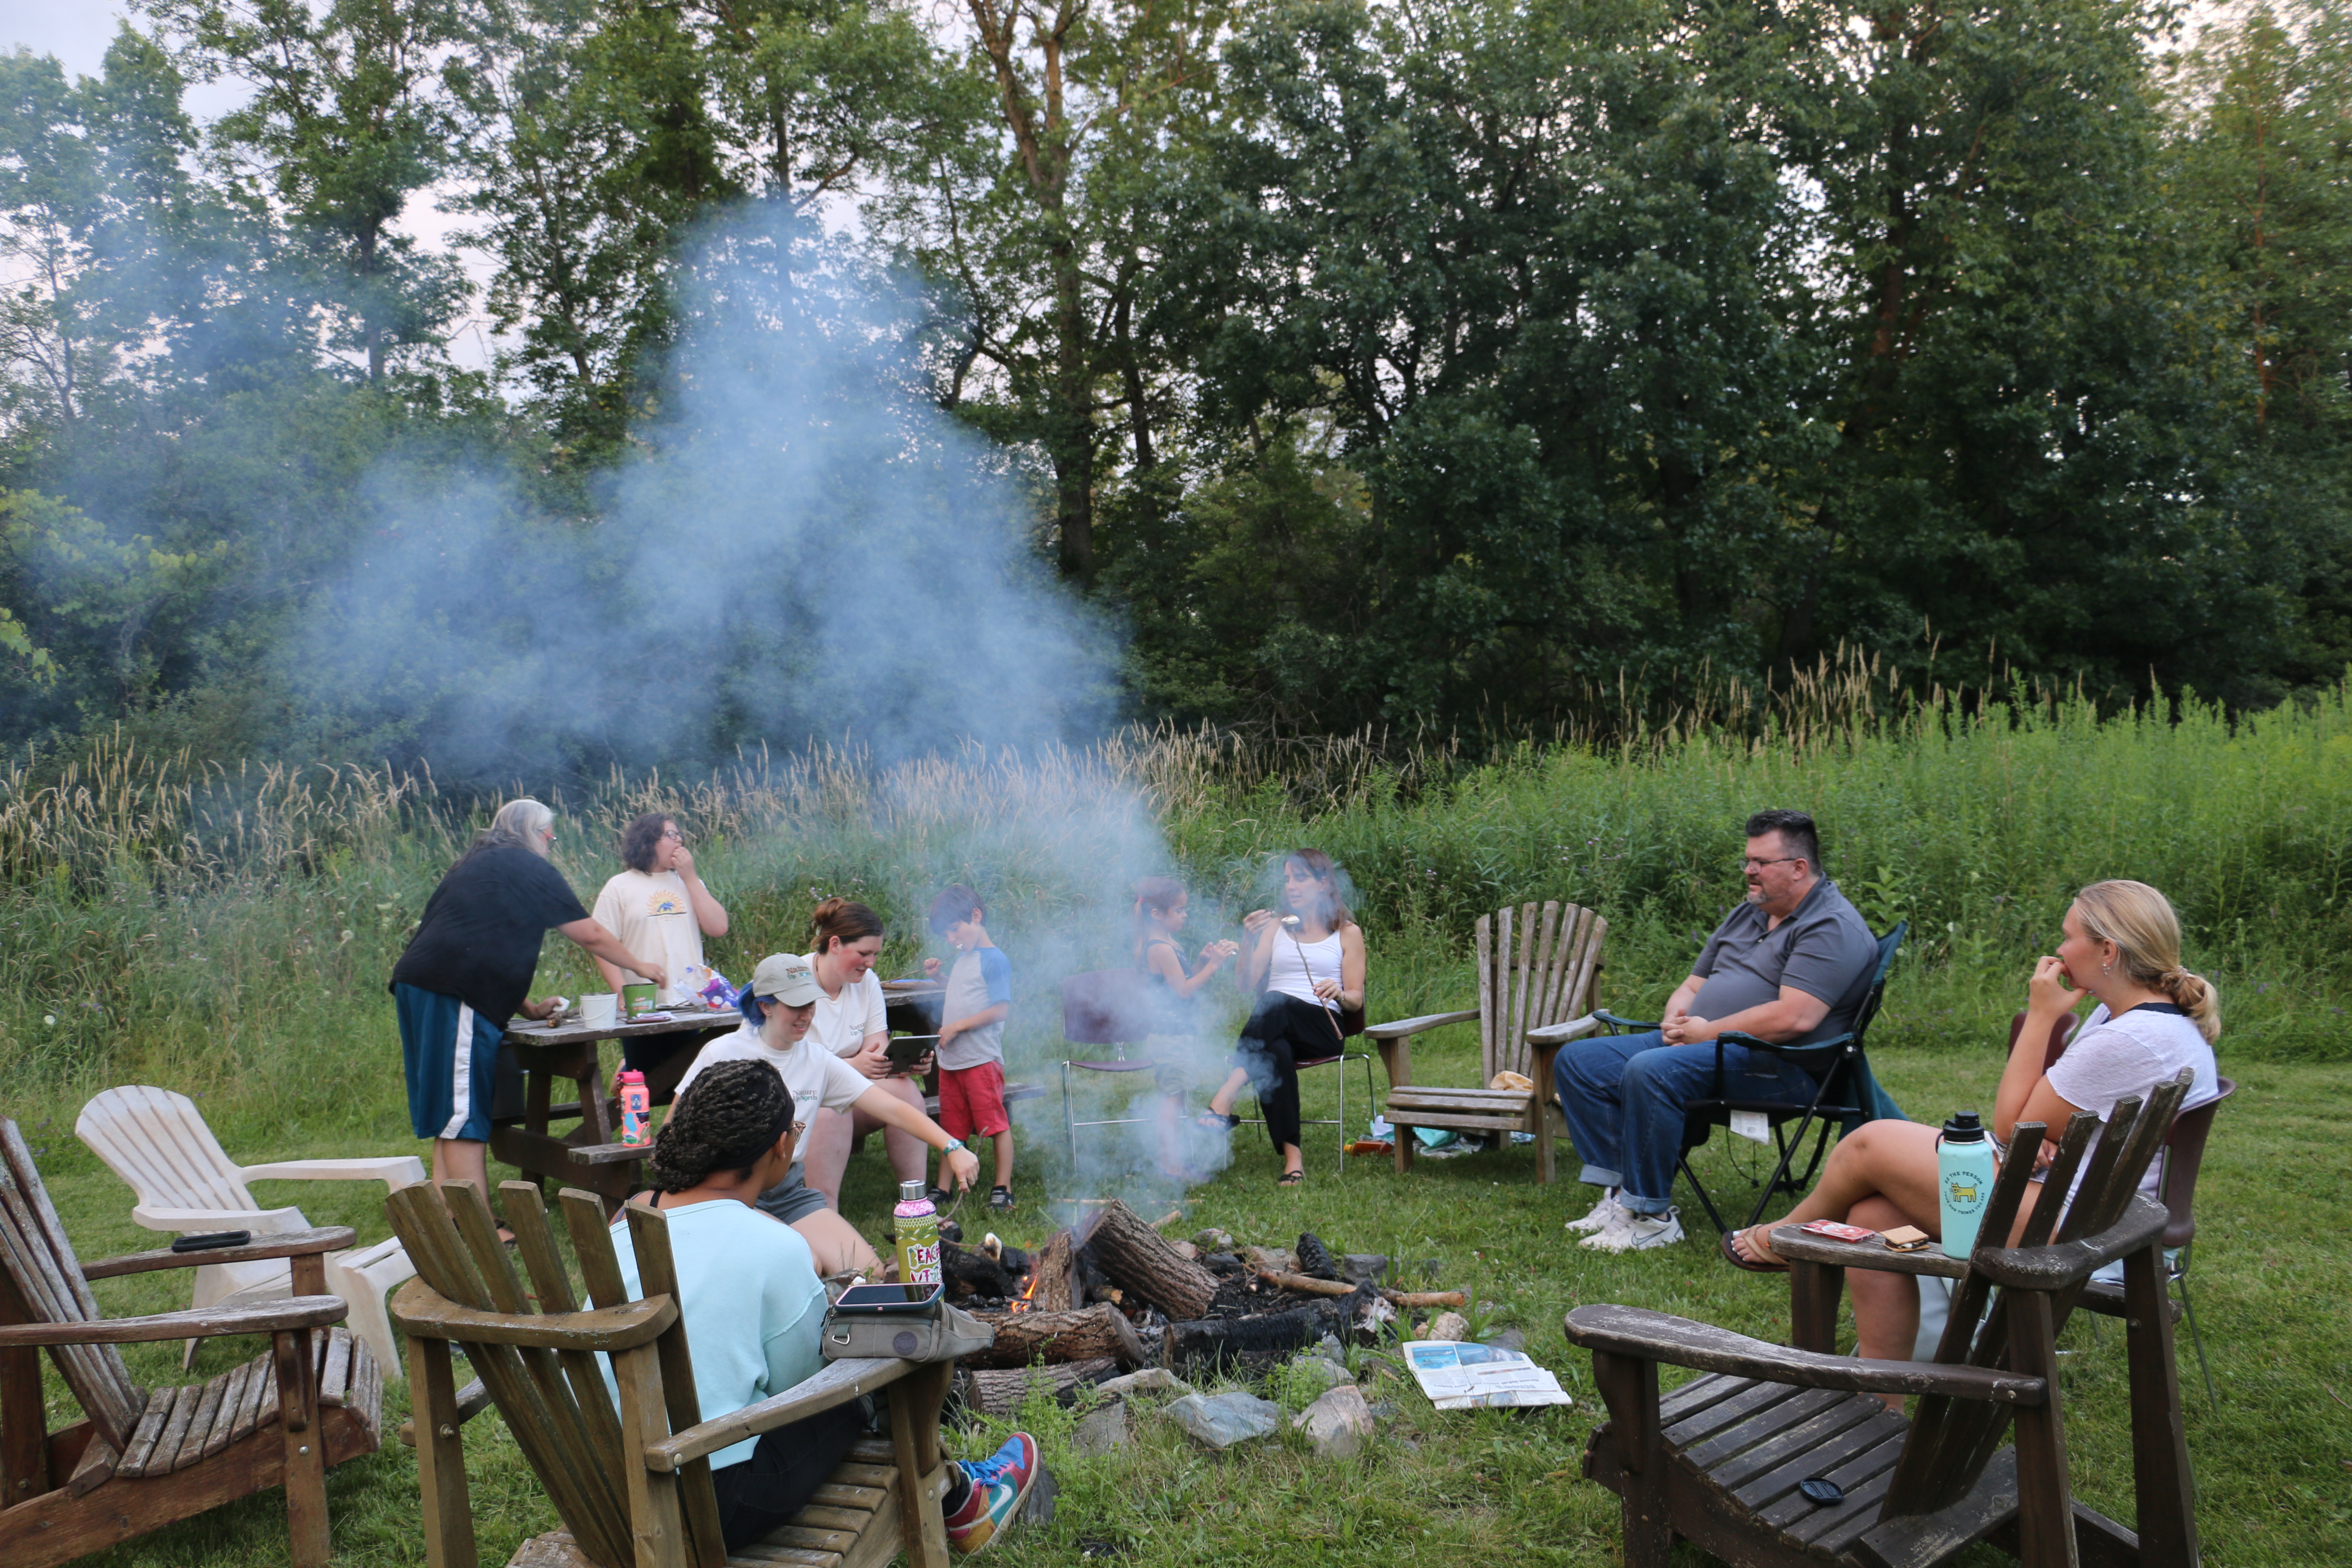 A group of people sitting around a campfire, smoke blowing up